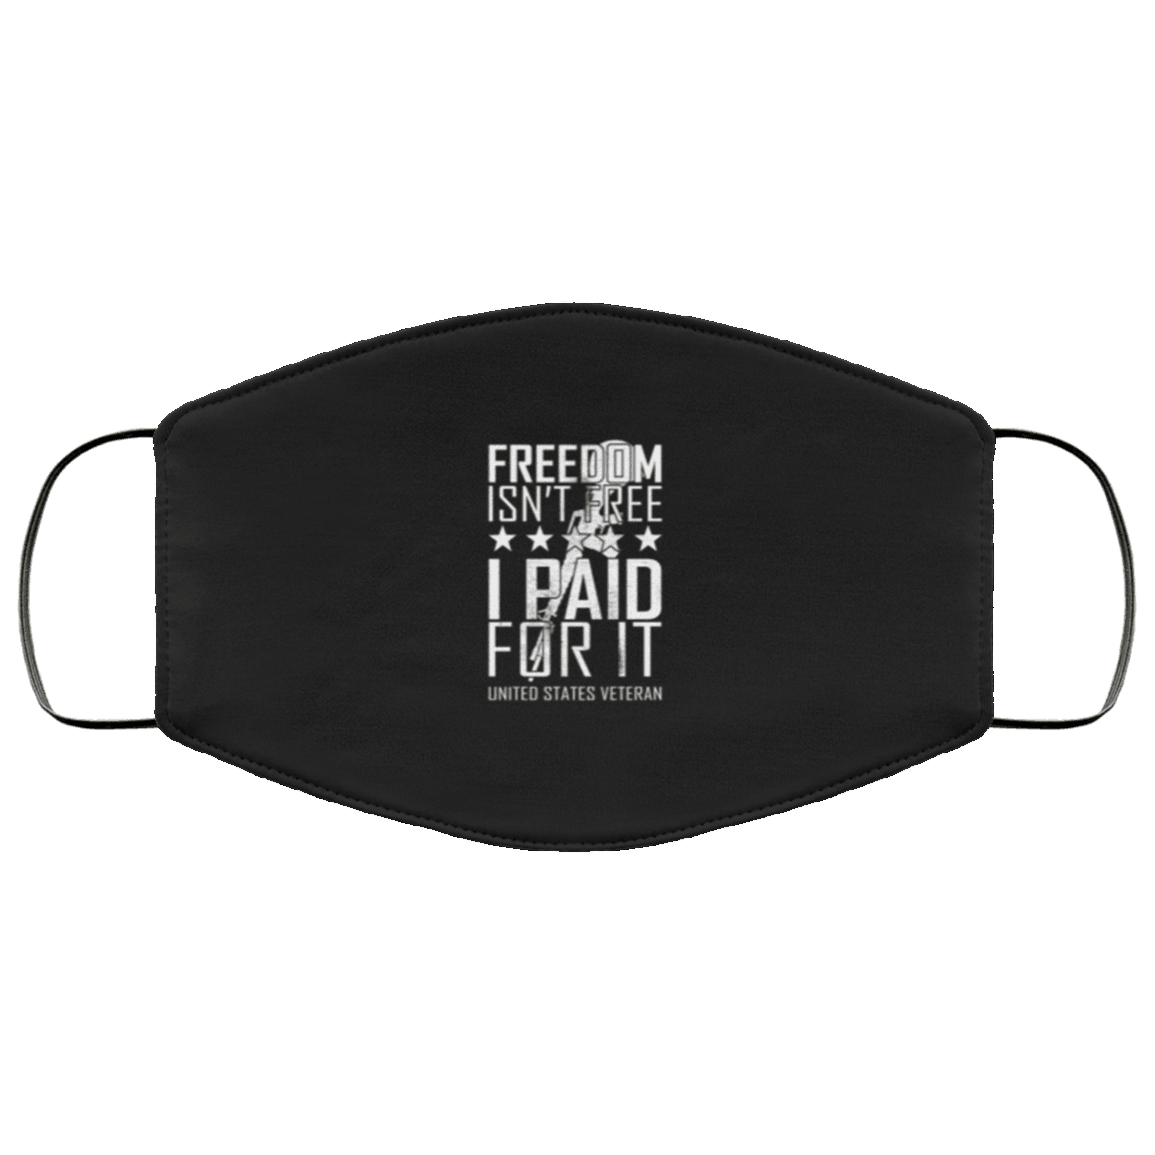 Designs by MyUtopia Shout Out:Freedom Isn't Free US Veteran Paid For It Adult Fabric Face Mask with Elastic Ear Loops,3 Layer Fabric Face Mask / Black / Adult,Fabric Face Mask